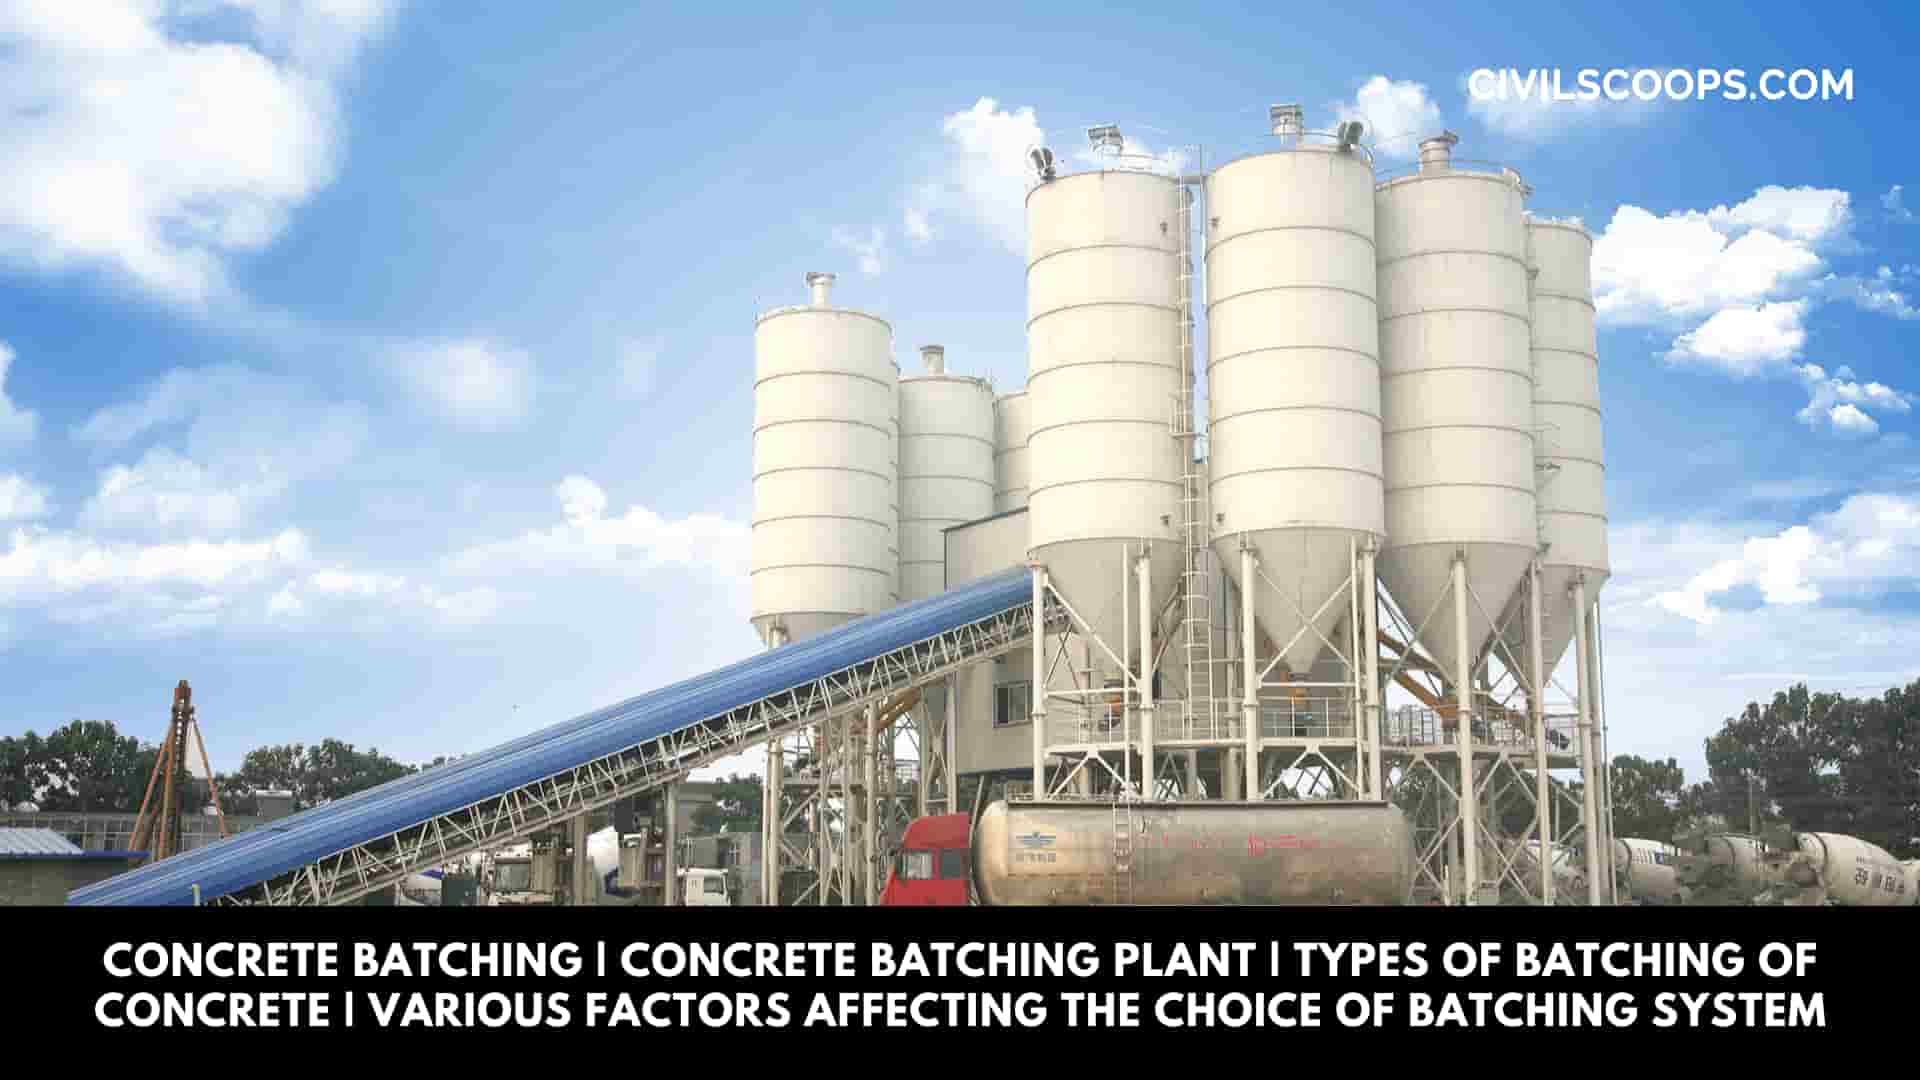 Concrete Batching Concrete Batching Plant Types of Batching of Concrete Various Factors Affecting the Choice of Batching System